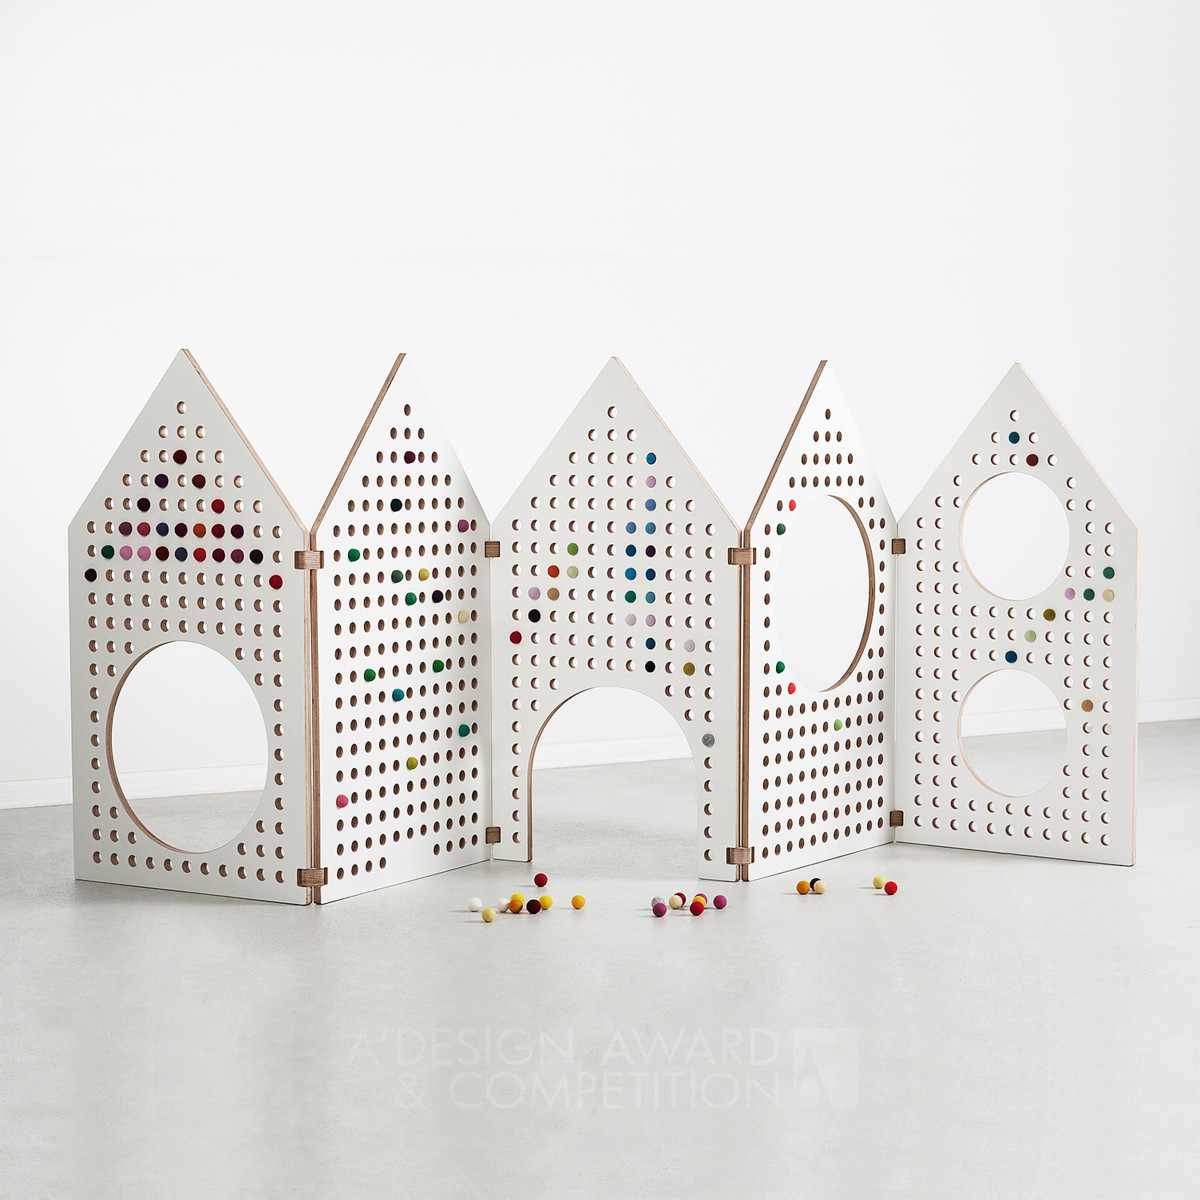 Little Houses: A Sensory Play Space Divider by Neringa Orlenok